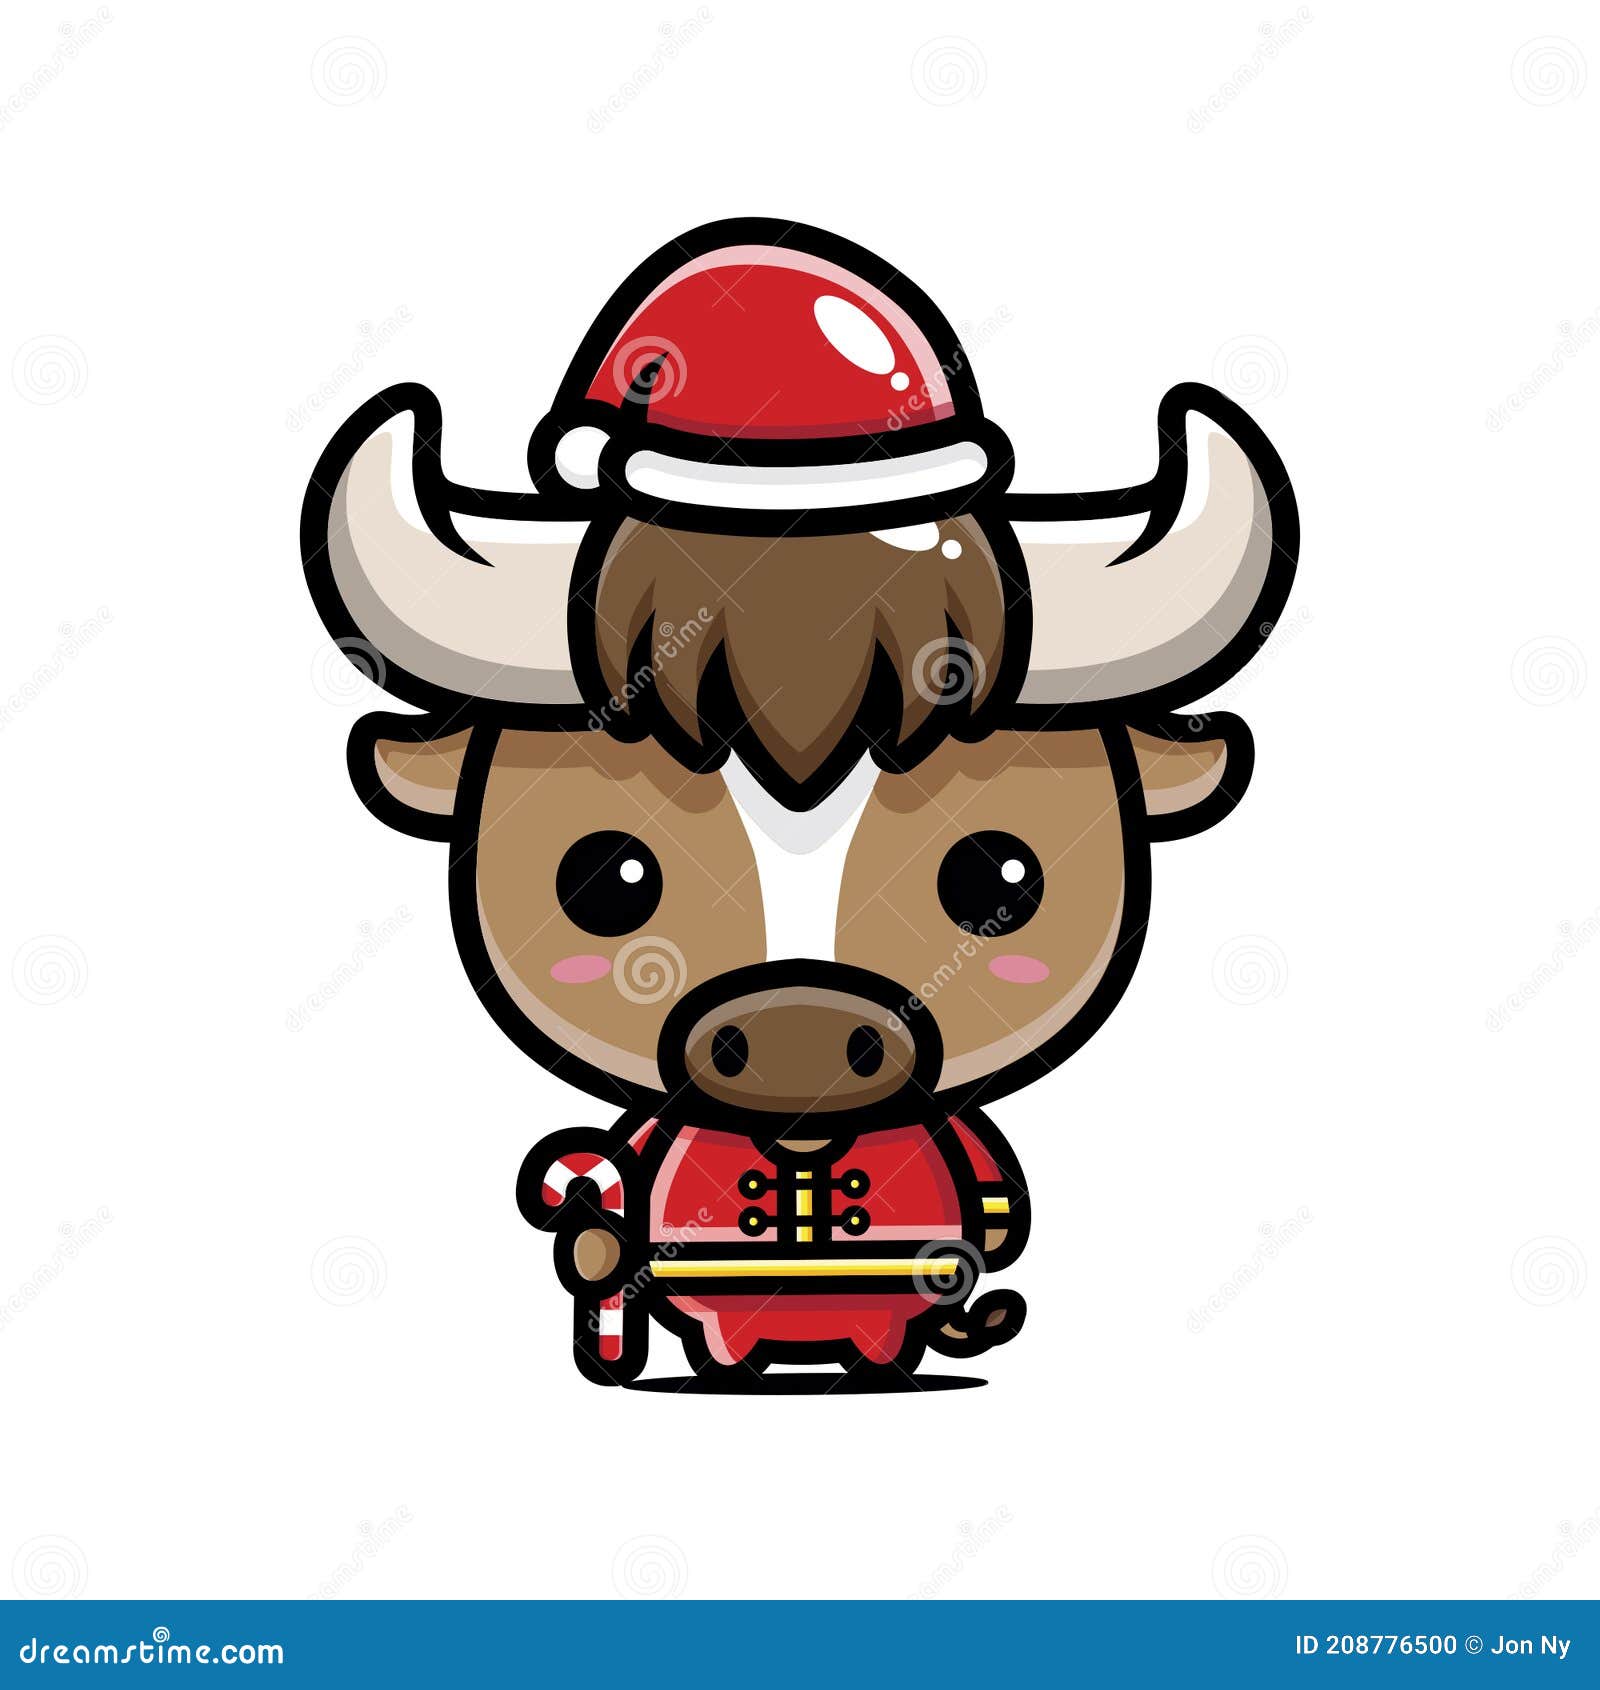 Cute Buffalo Animal Cartoon Characters Wearing Costumes To Celebrate the  Chinese New Year Stock Vector - Illustration of line, celebration: 208776500